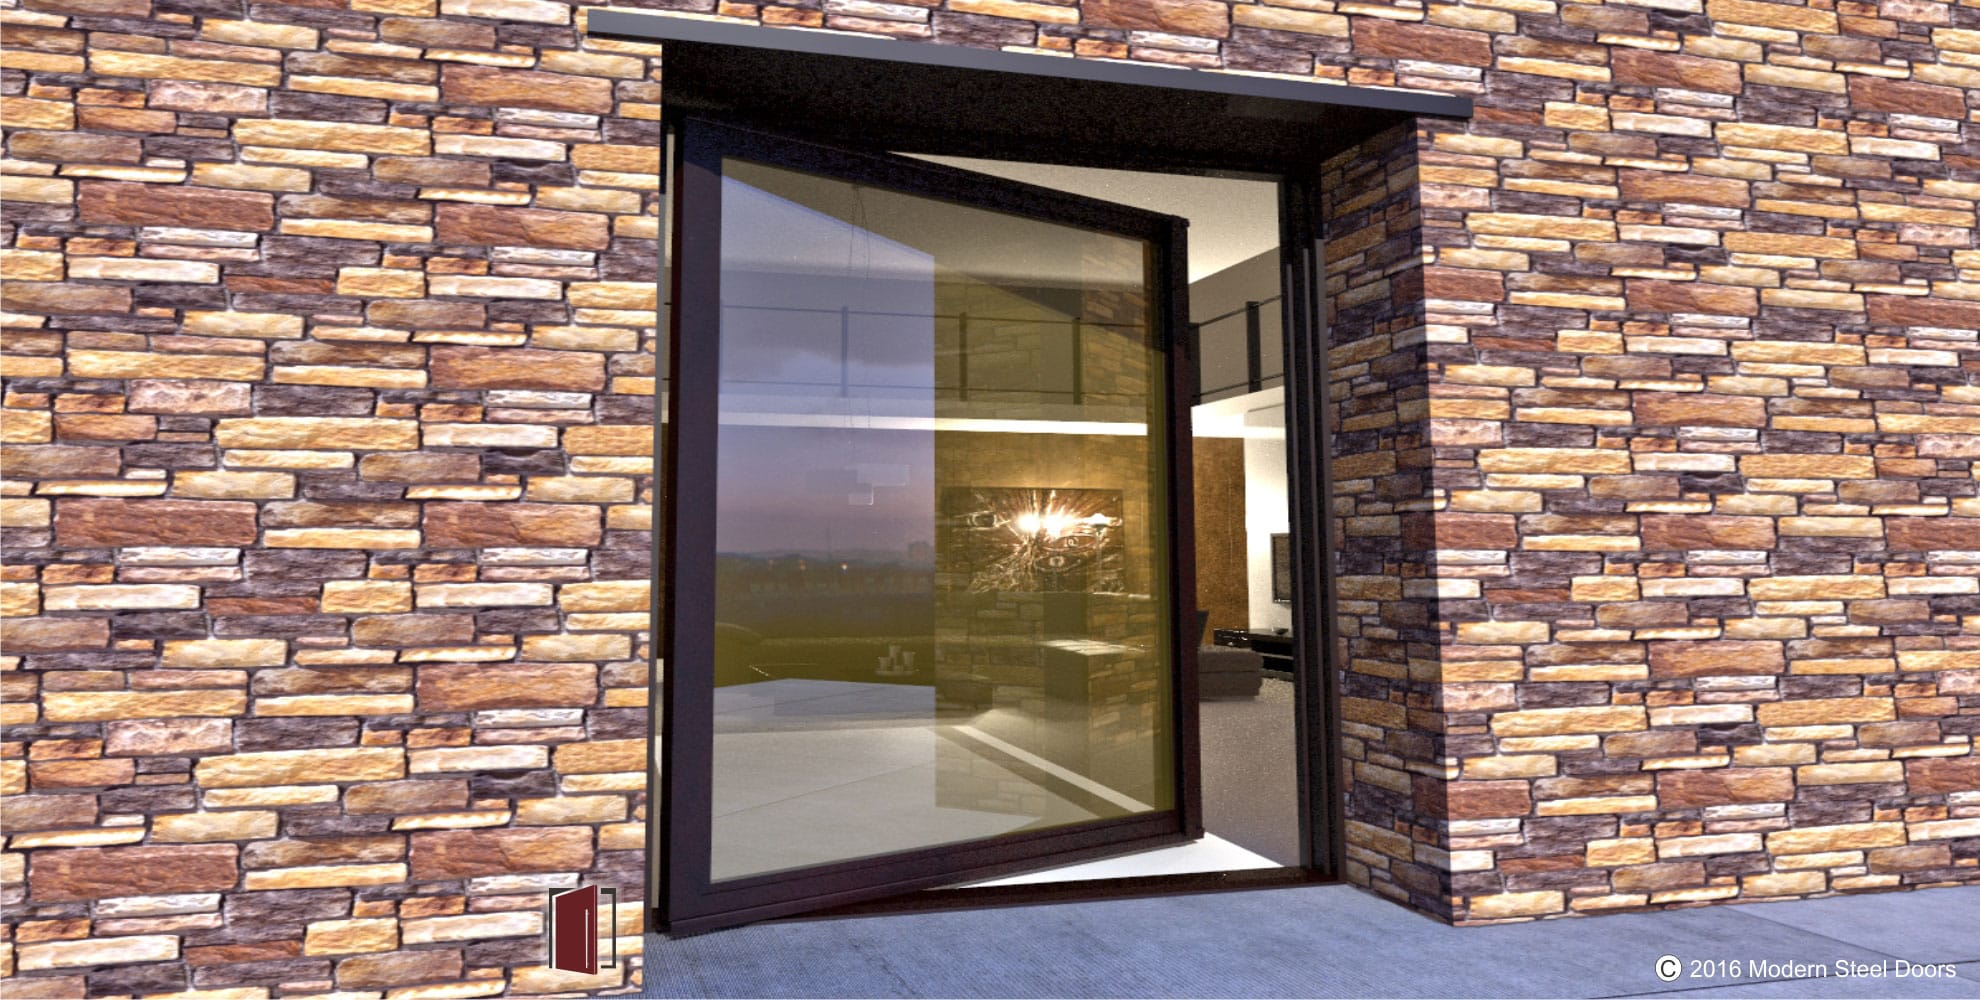 large sophisticated front door made of glass and bronze metal with matching bronze hardware